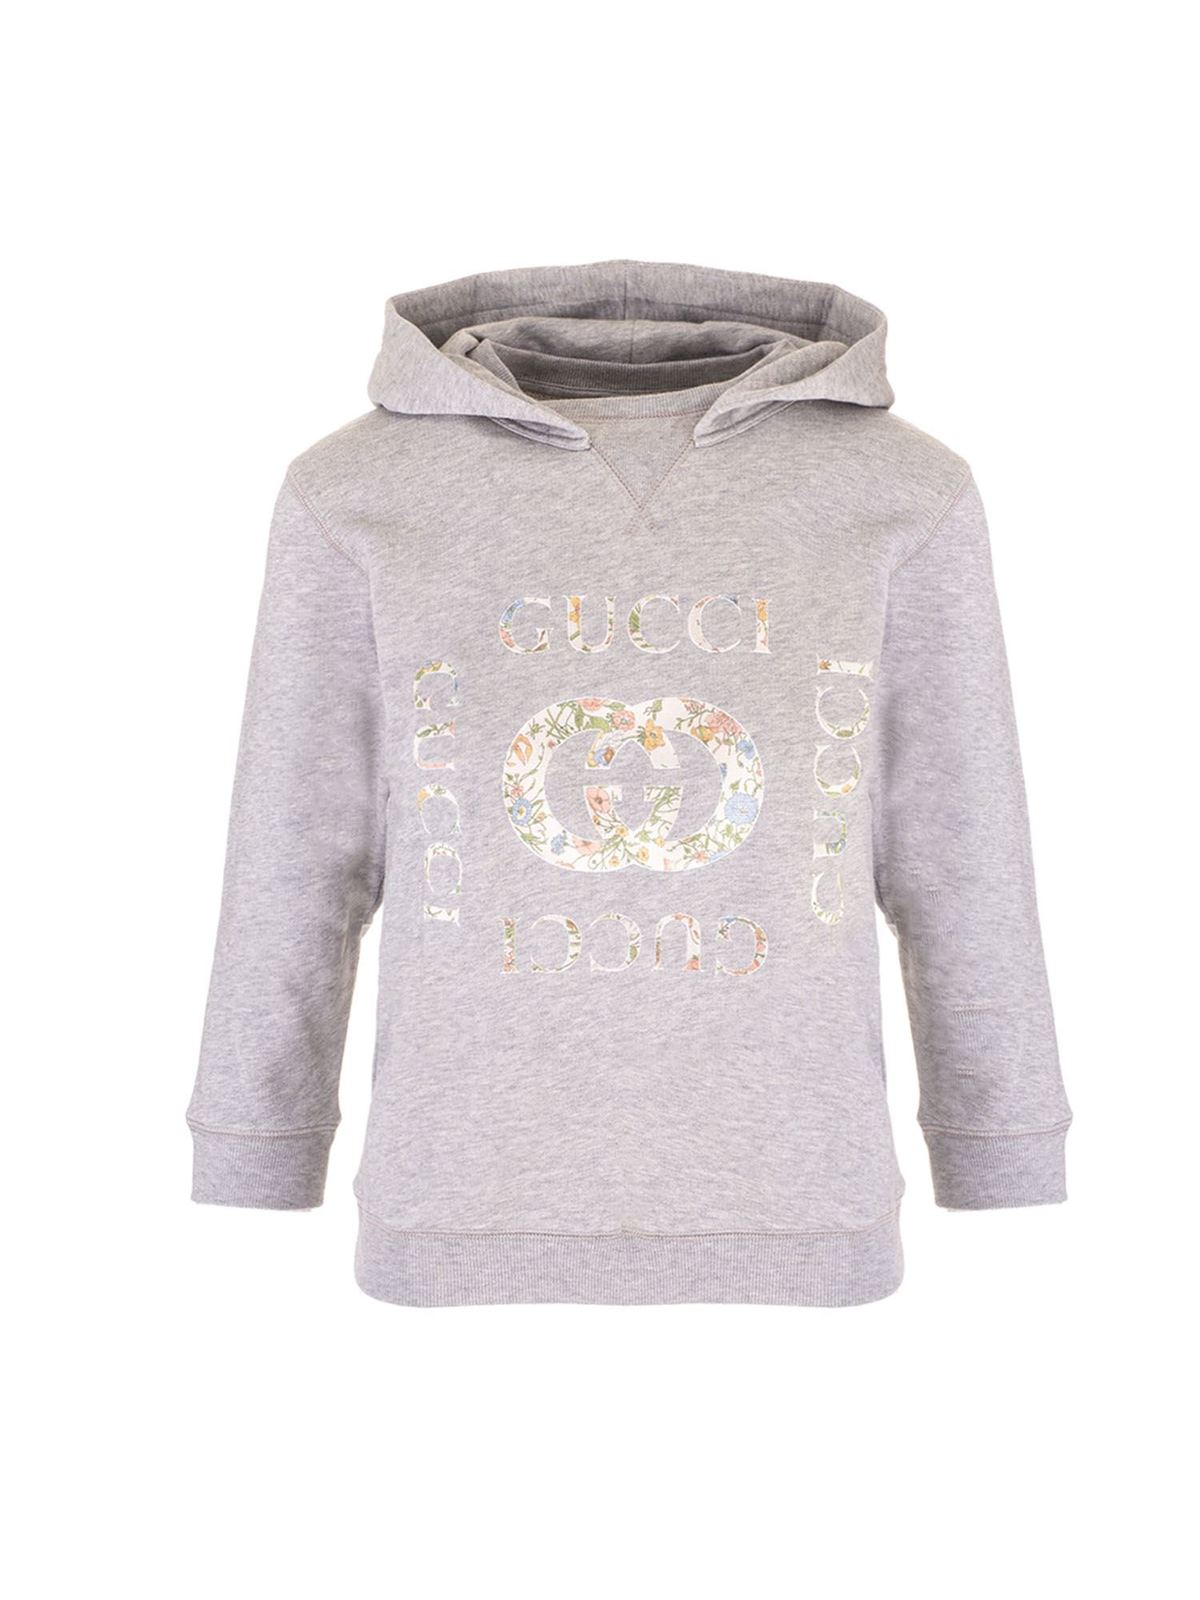 GUCCI FLORAL GG HOODIE IN GRAY